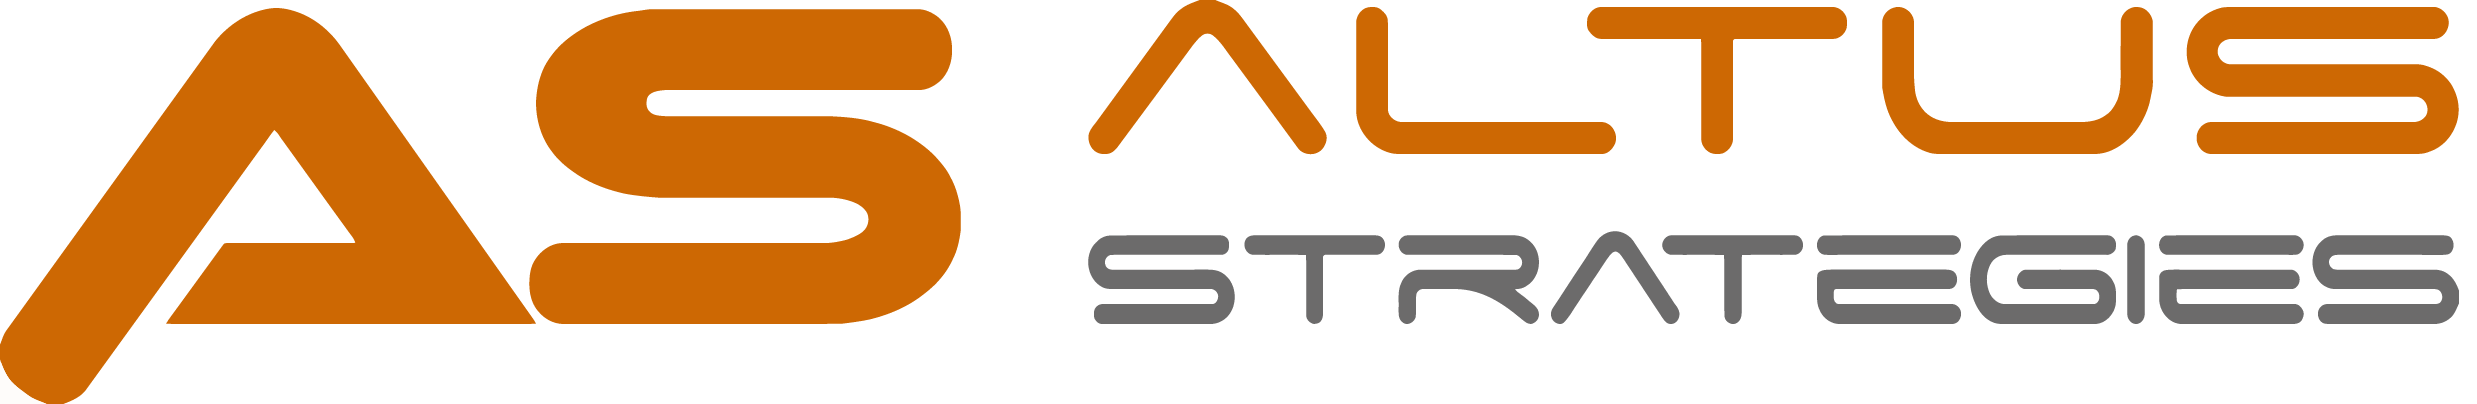 Altus Strategies PLC, Wednesday, May 27, 2020, Press release picture